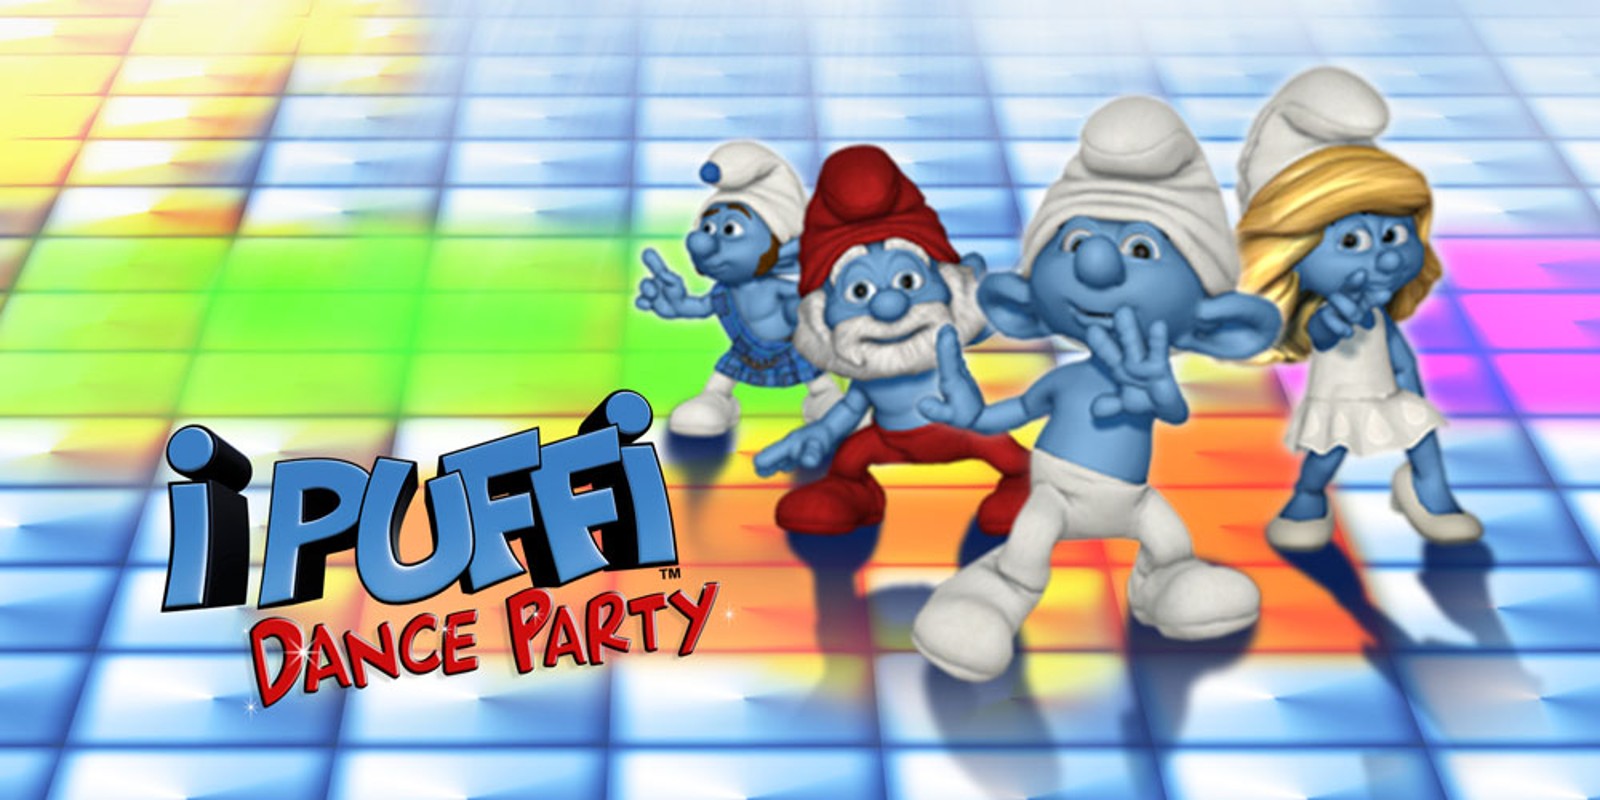 I Puffi: Dance Party